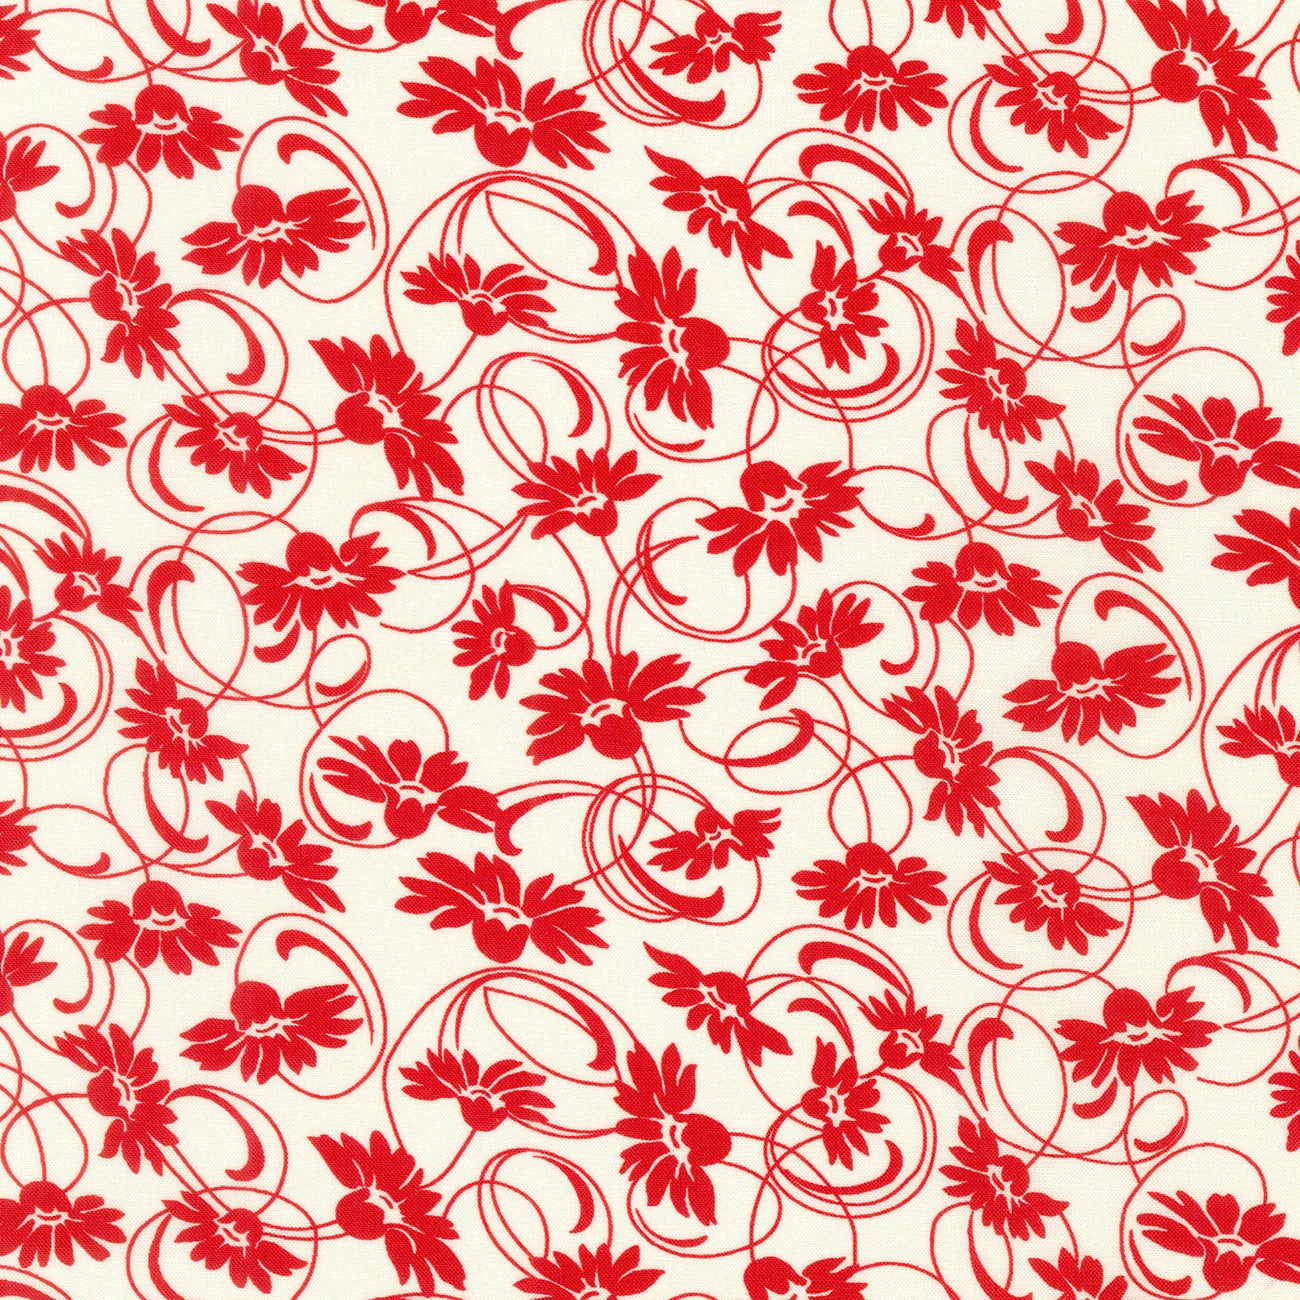 Daisy's Redwork / Swirling Daisies - Vintage White